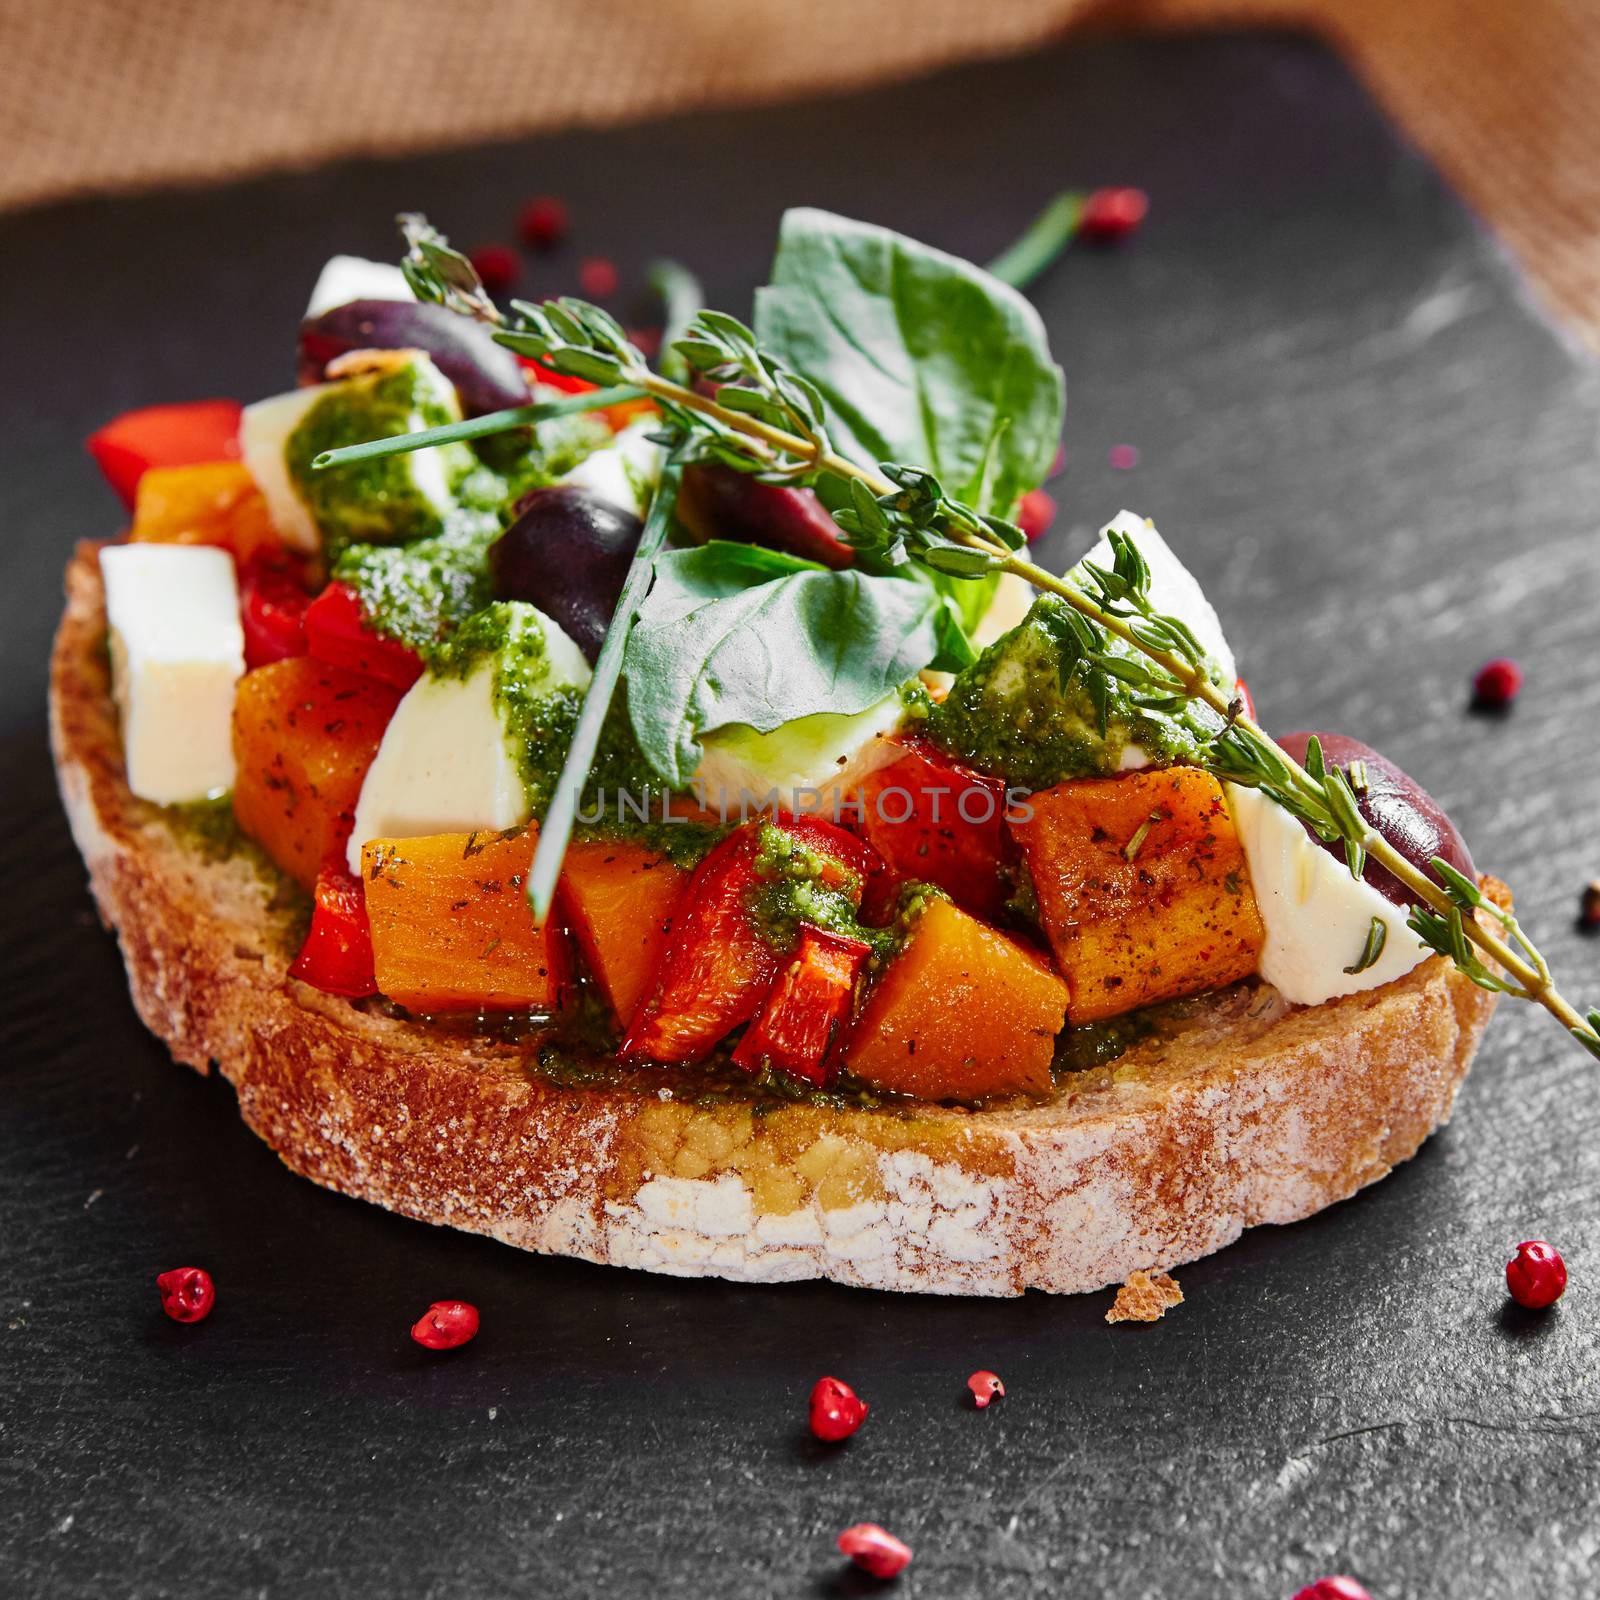 Bruschetta with roasted pumpkin, red pepper,pesto and cheese